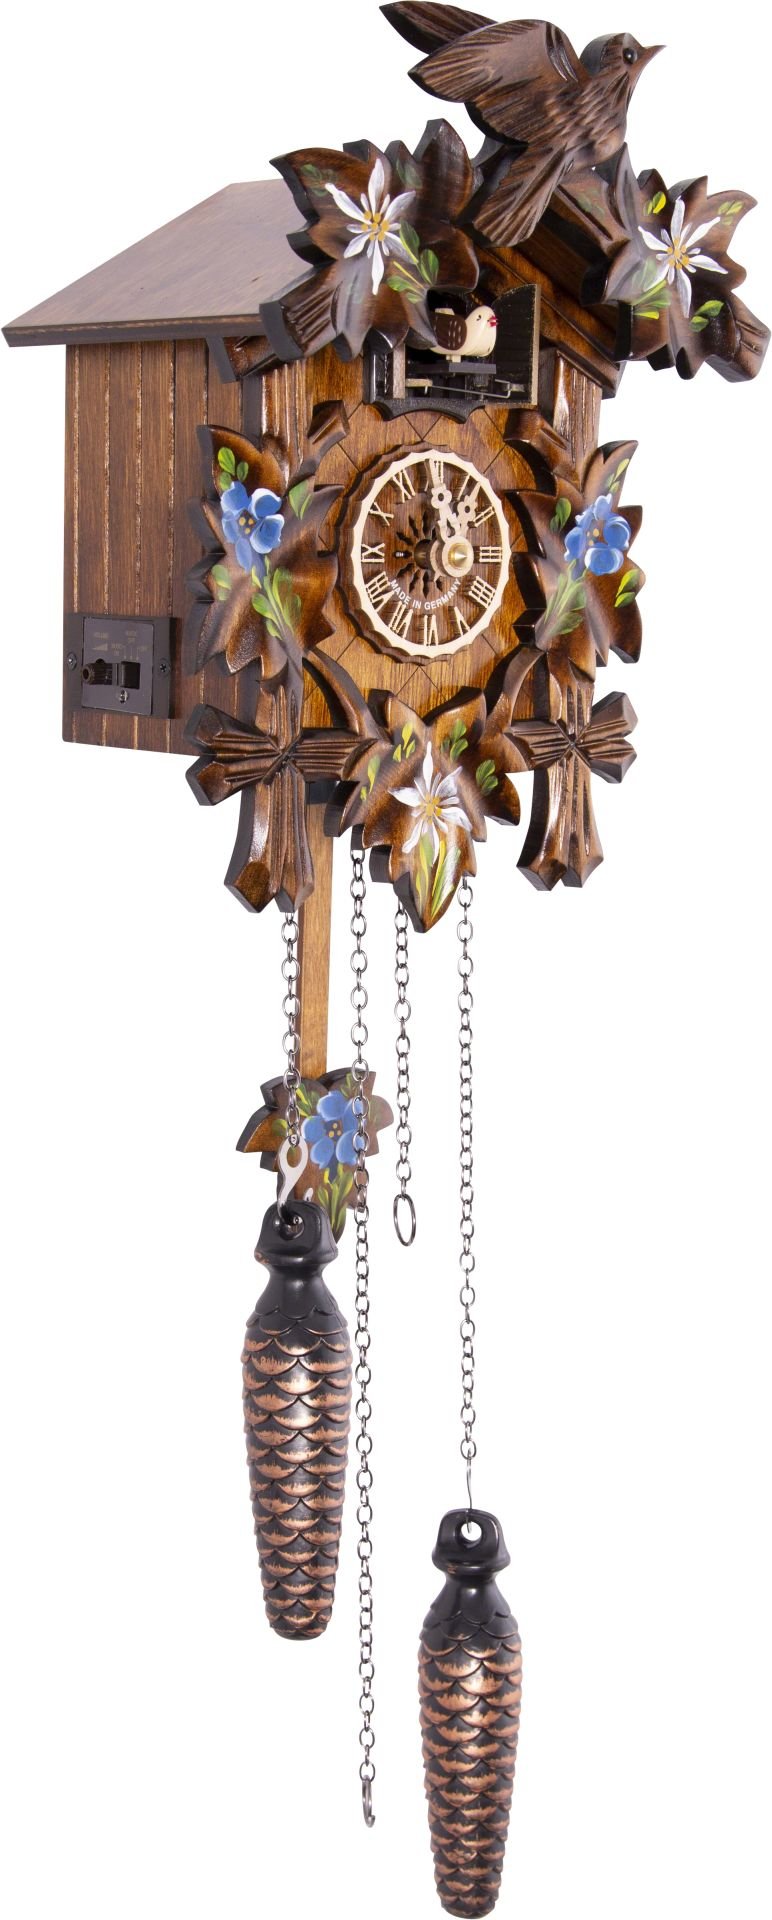 Cuckoo Clock Carved Style Quartz Movement 22cm by Engstler